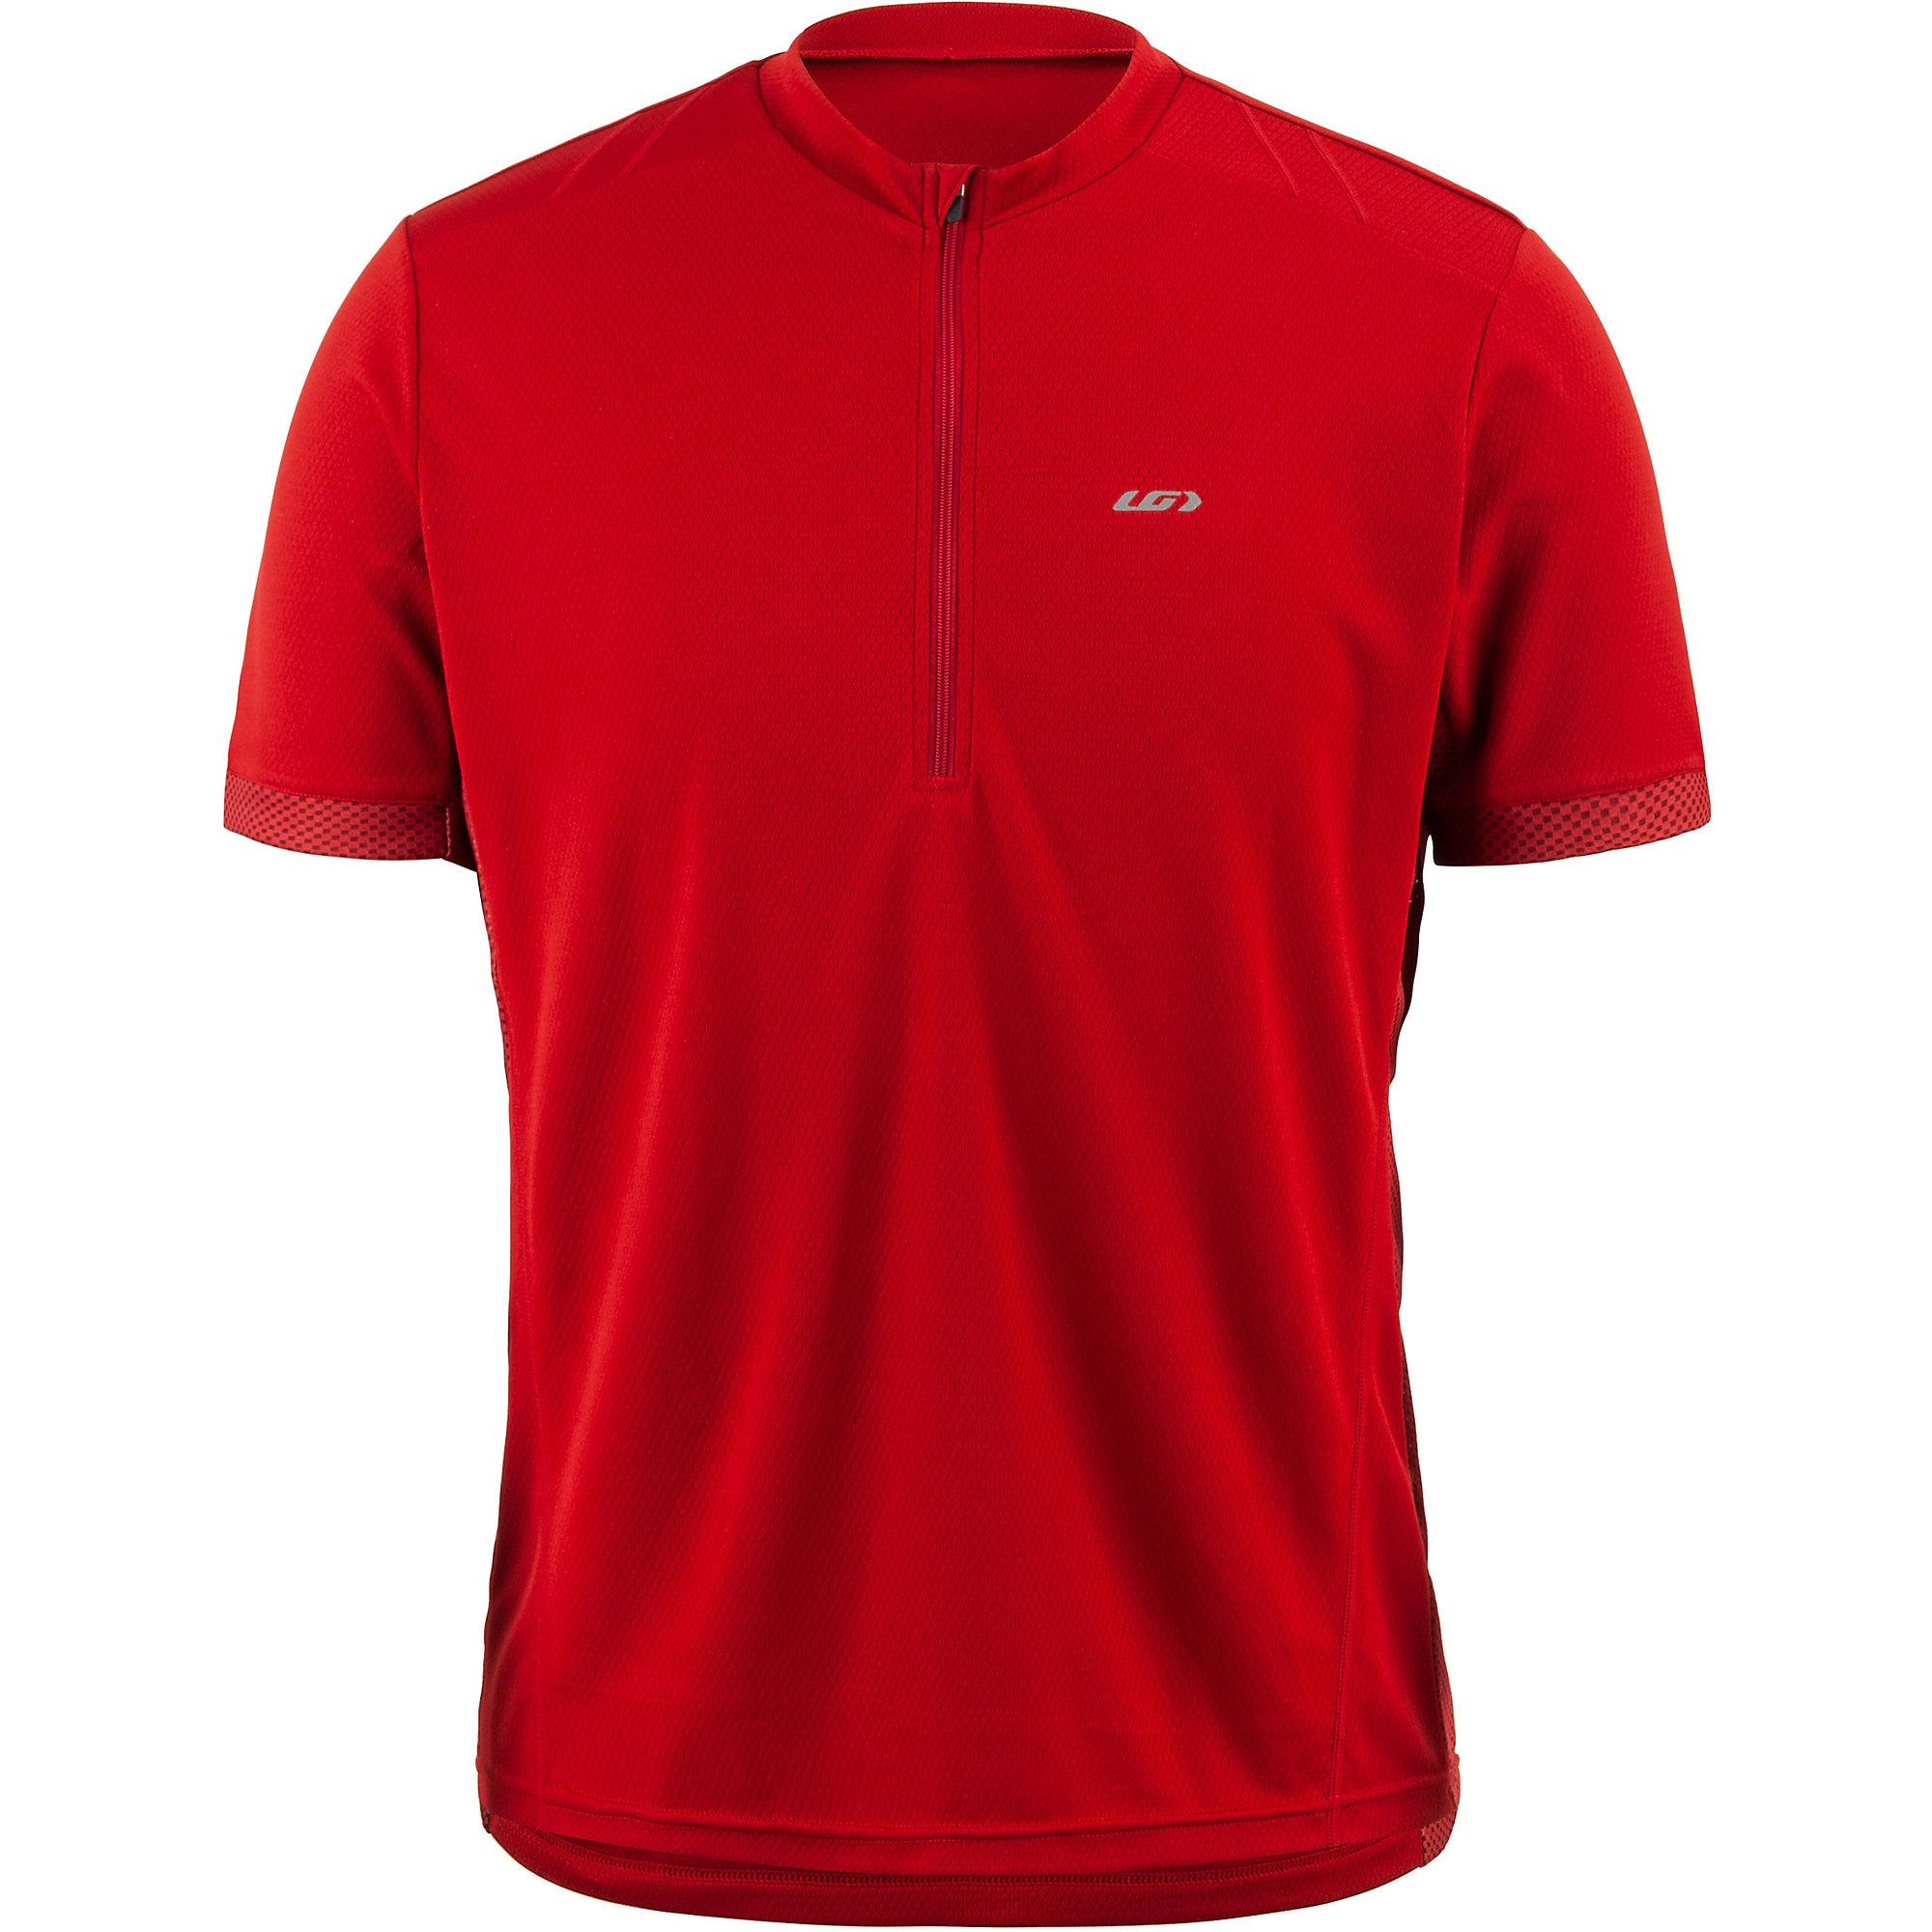 Louis Garneau Connection 2 Jersey in Red for Men - Lyst